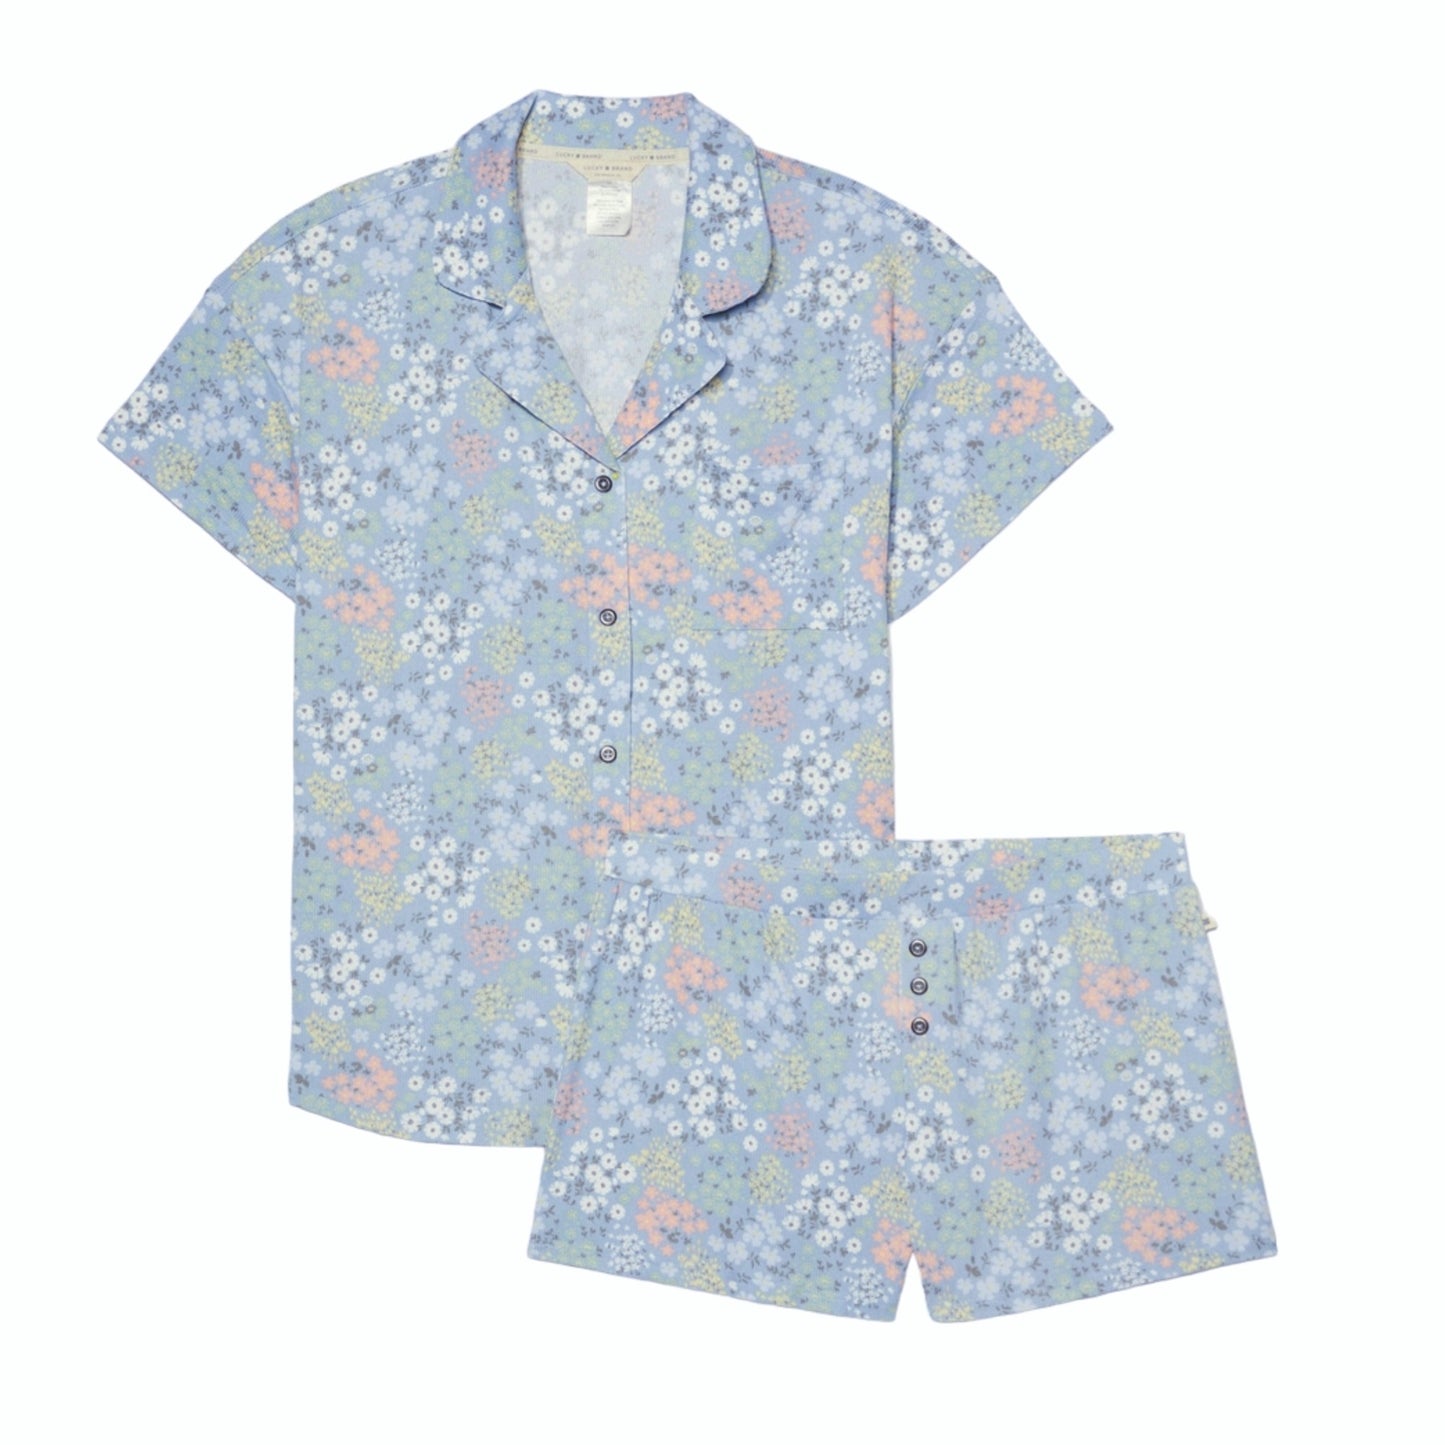 Lucky Brand Women's 2-Piece Floral Print  PJ Classic Button Up Top and Shorts Lounge Set